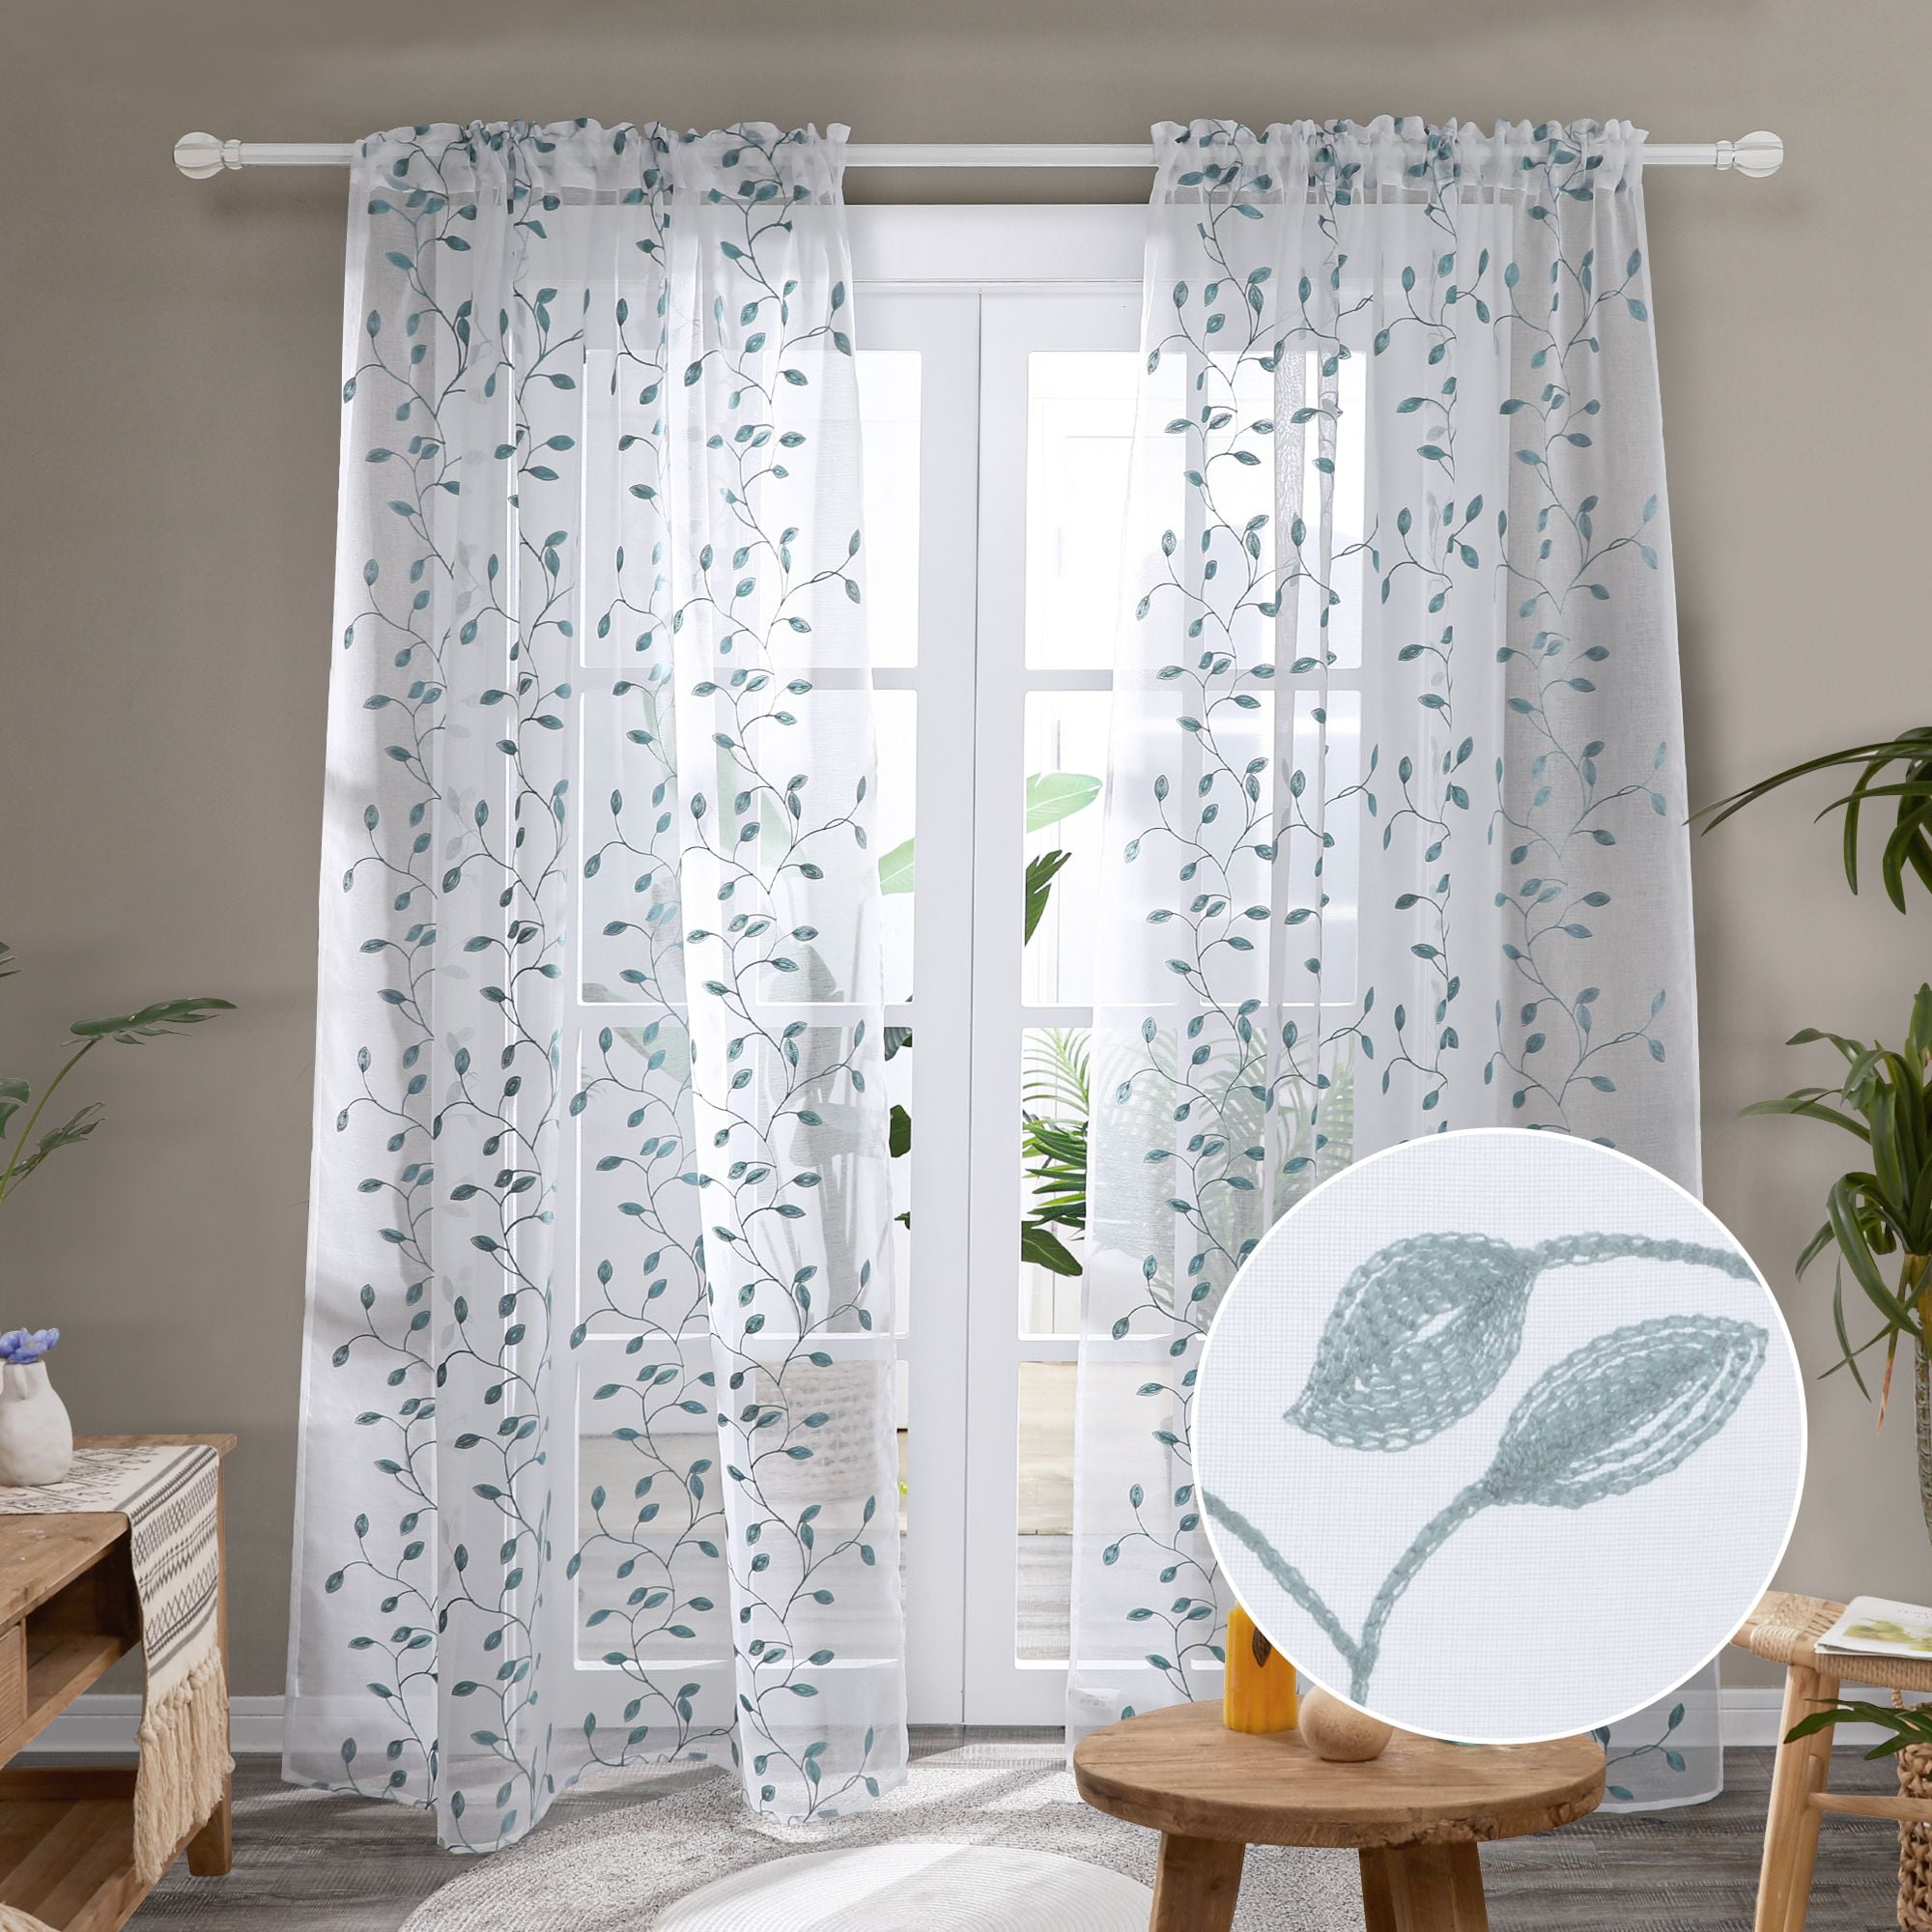 Sheer Voile Curtains Floral Window Panel Curtain Drapes Balcony Home Multi 